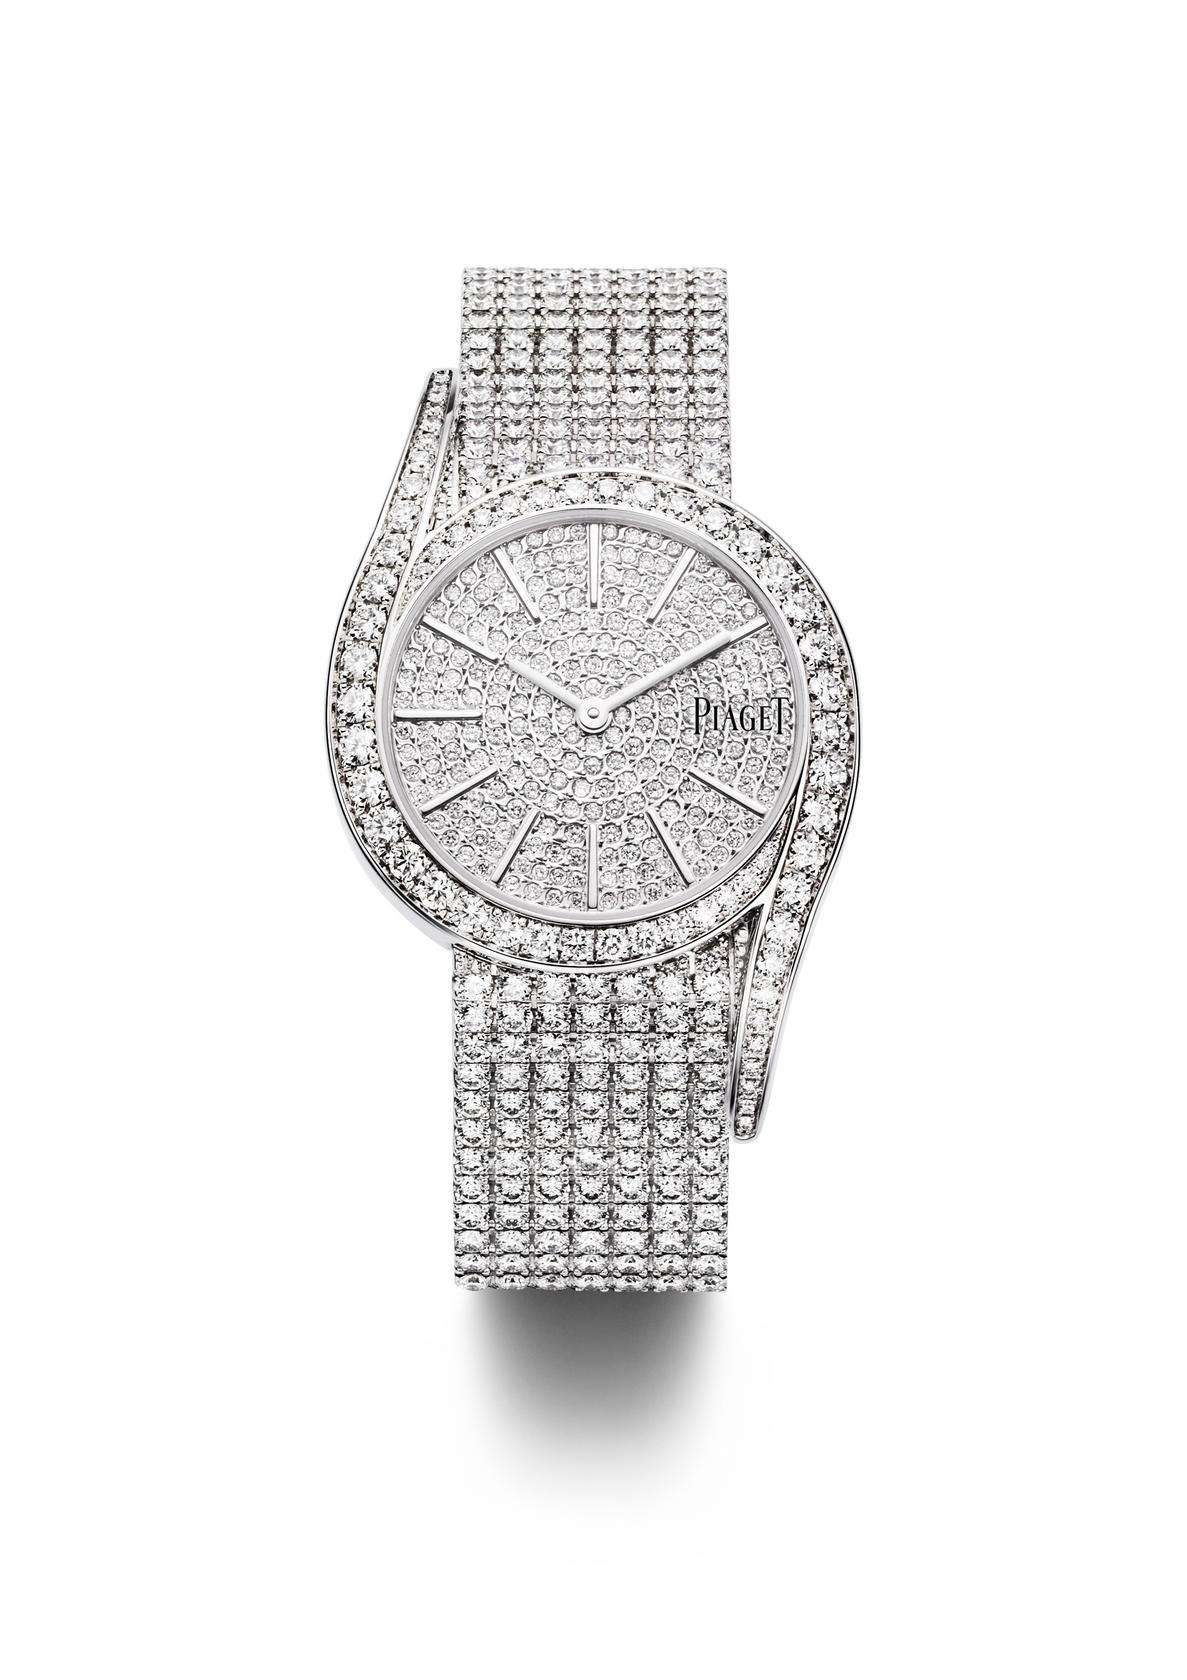 Limelight Gala watch with bracelet and clasp paved with 451 brilliant-cut diamonds (left) and with a black satin strap